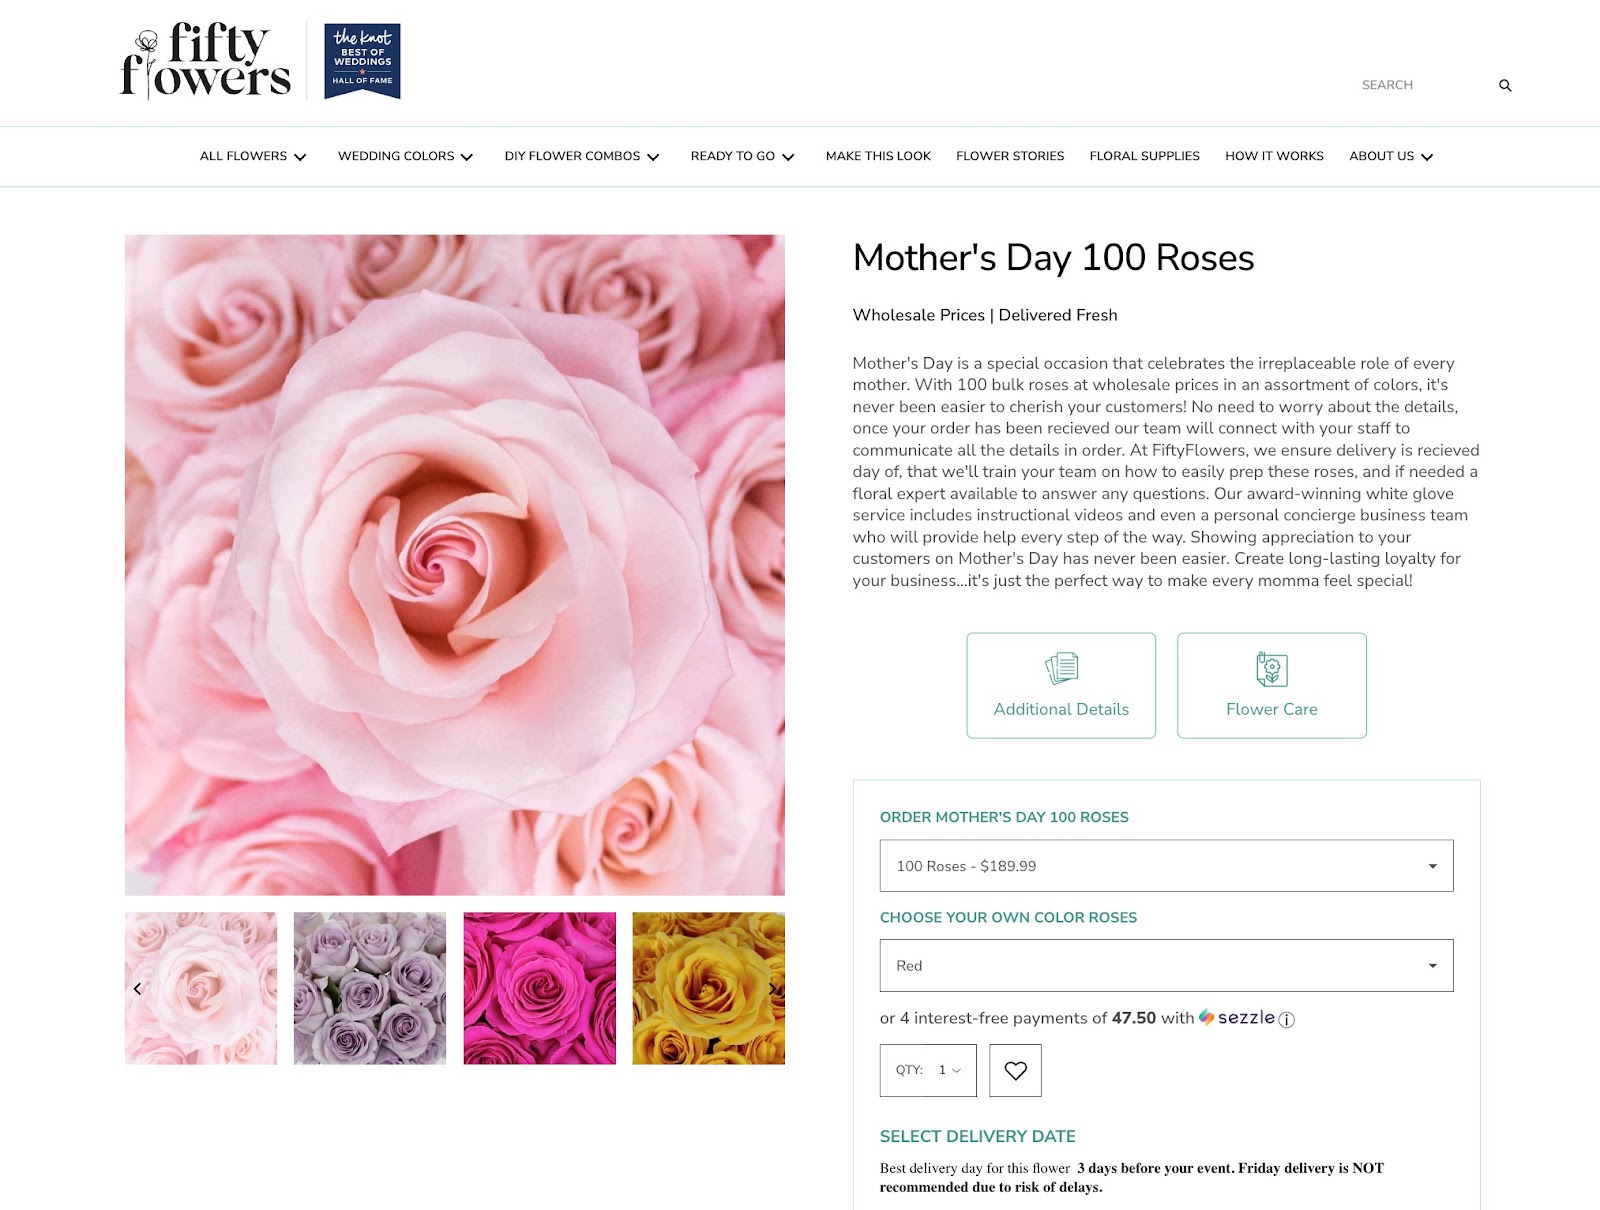 Mother’s Day Product Bundles You Can Build In Under 5 Minutes